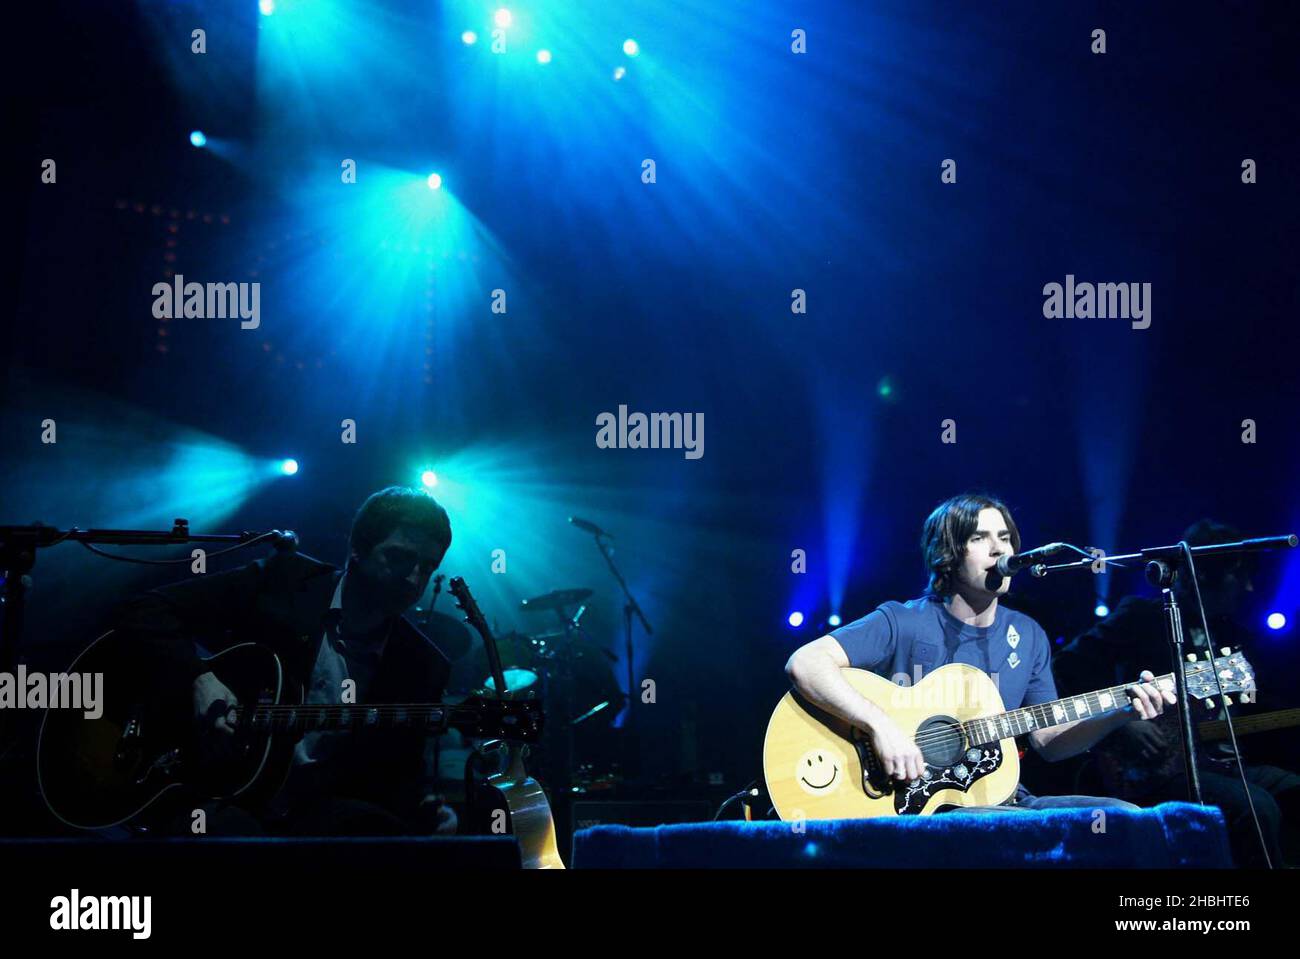 Noel Gallagher and Kelly Jones (Stereophonics) perform live on stage at the Teenage Cancer Trust Concert at the Royal Albert Hall London. Live. Half Length. Stock Photo